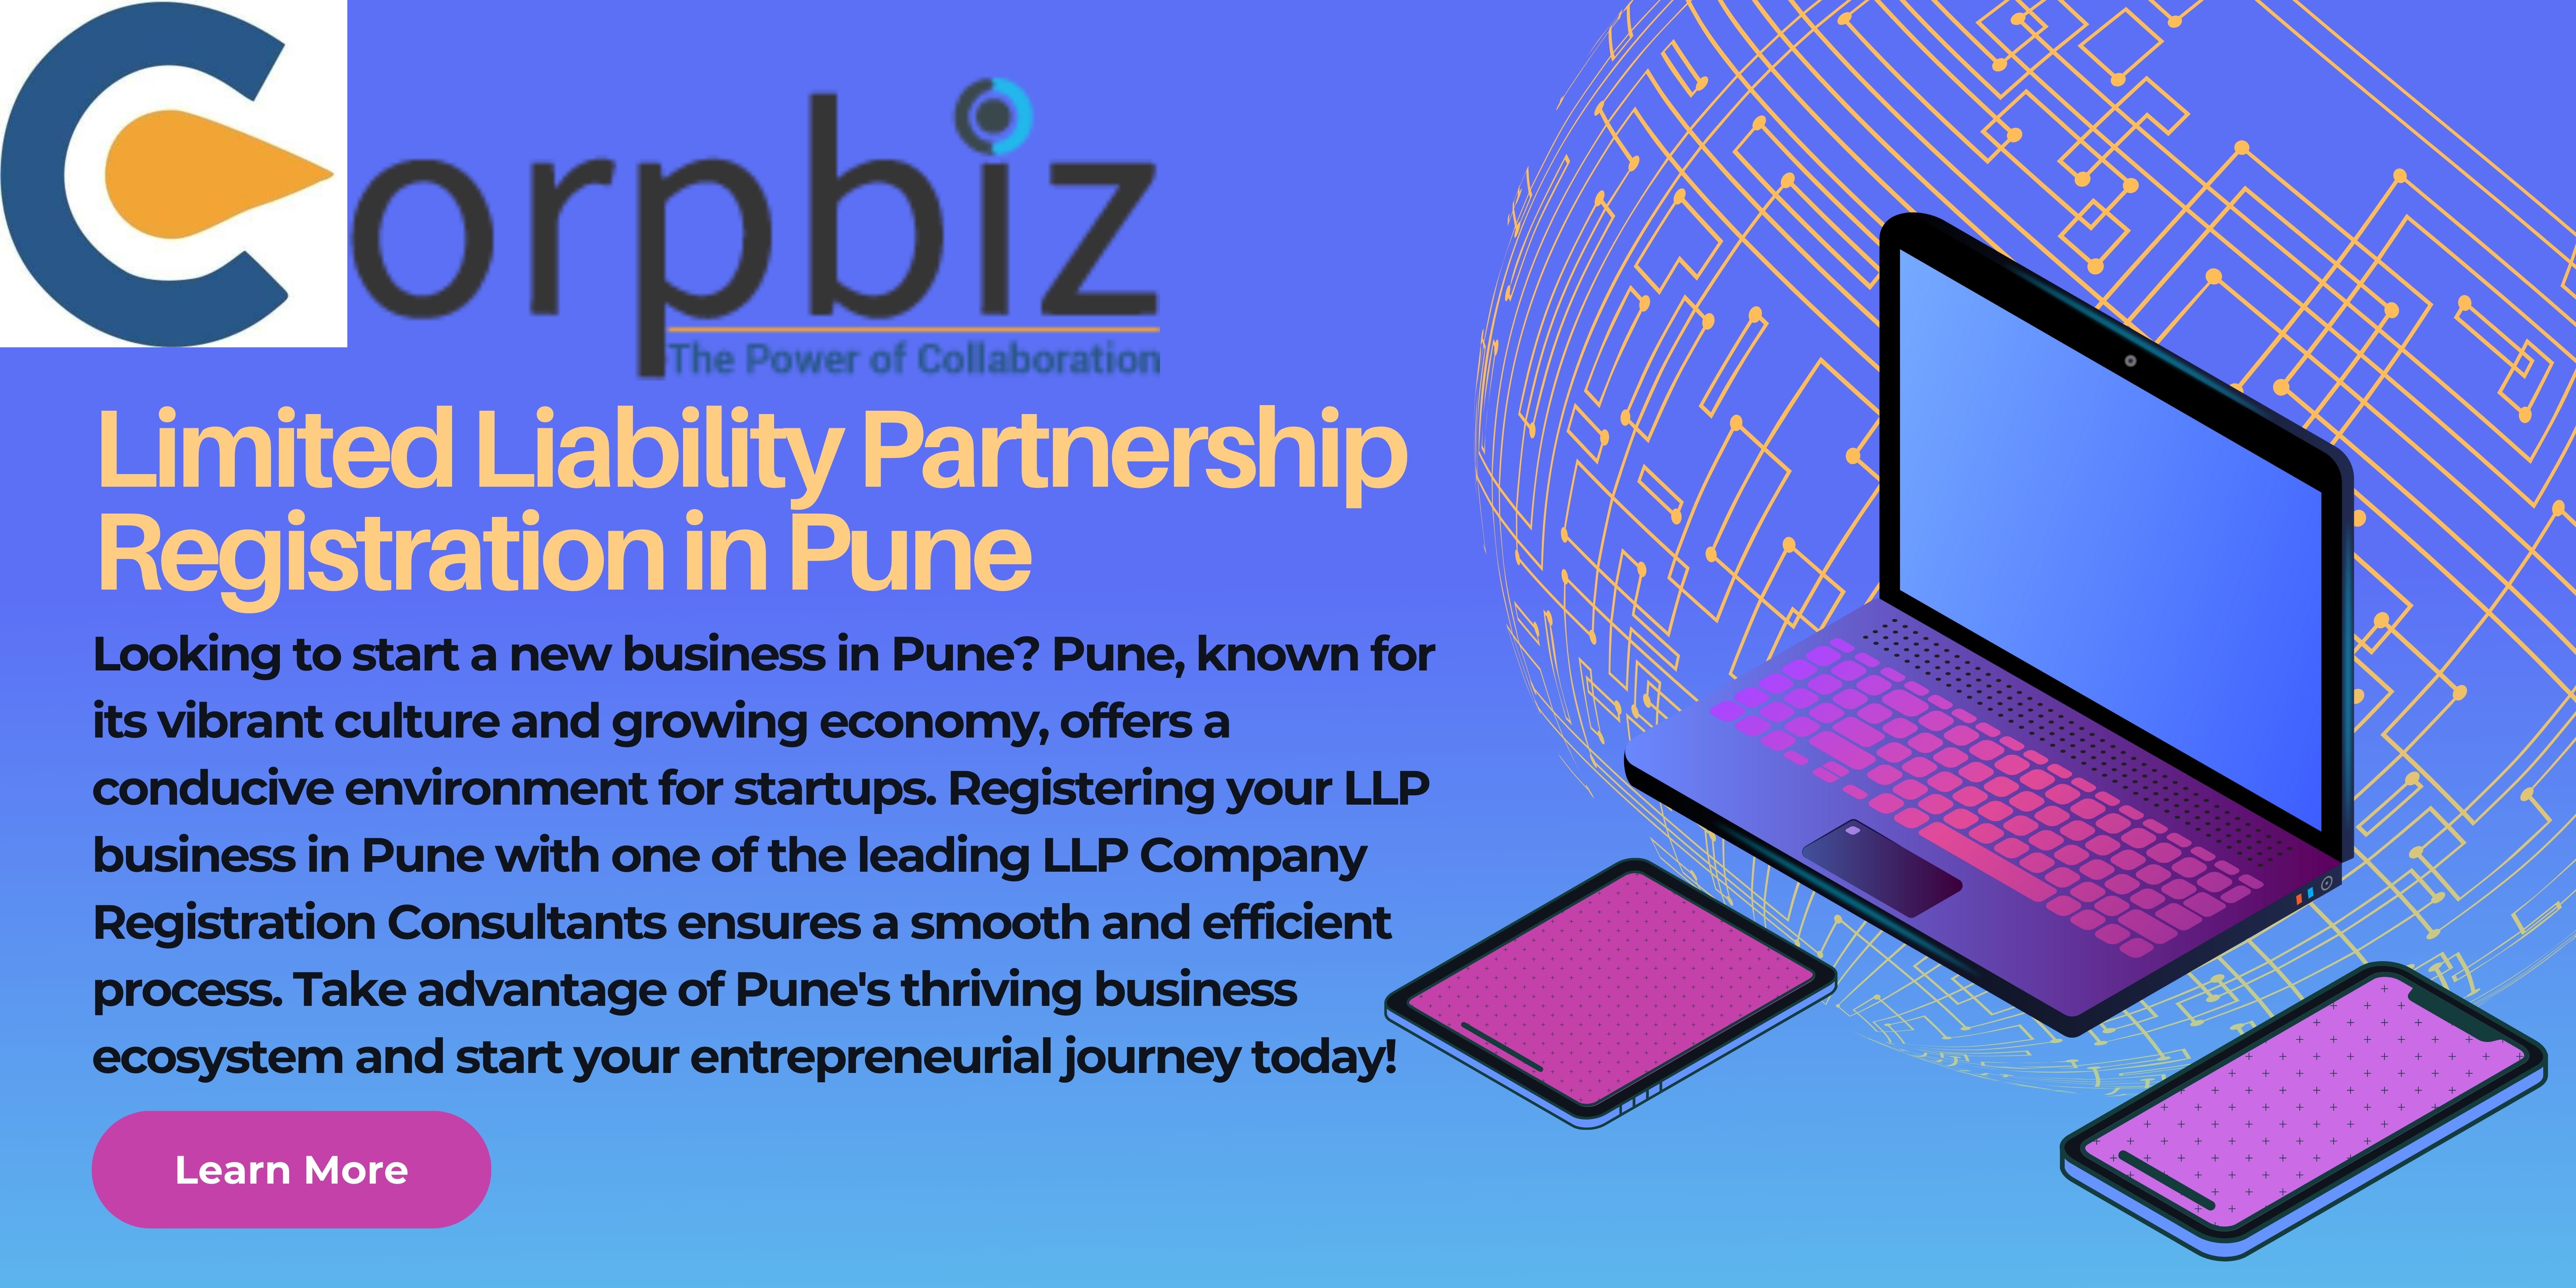  Limited Liability Partnership Registration in Pune